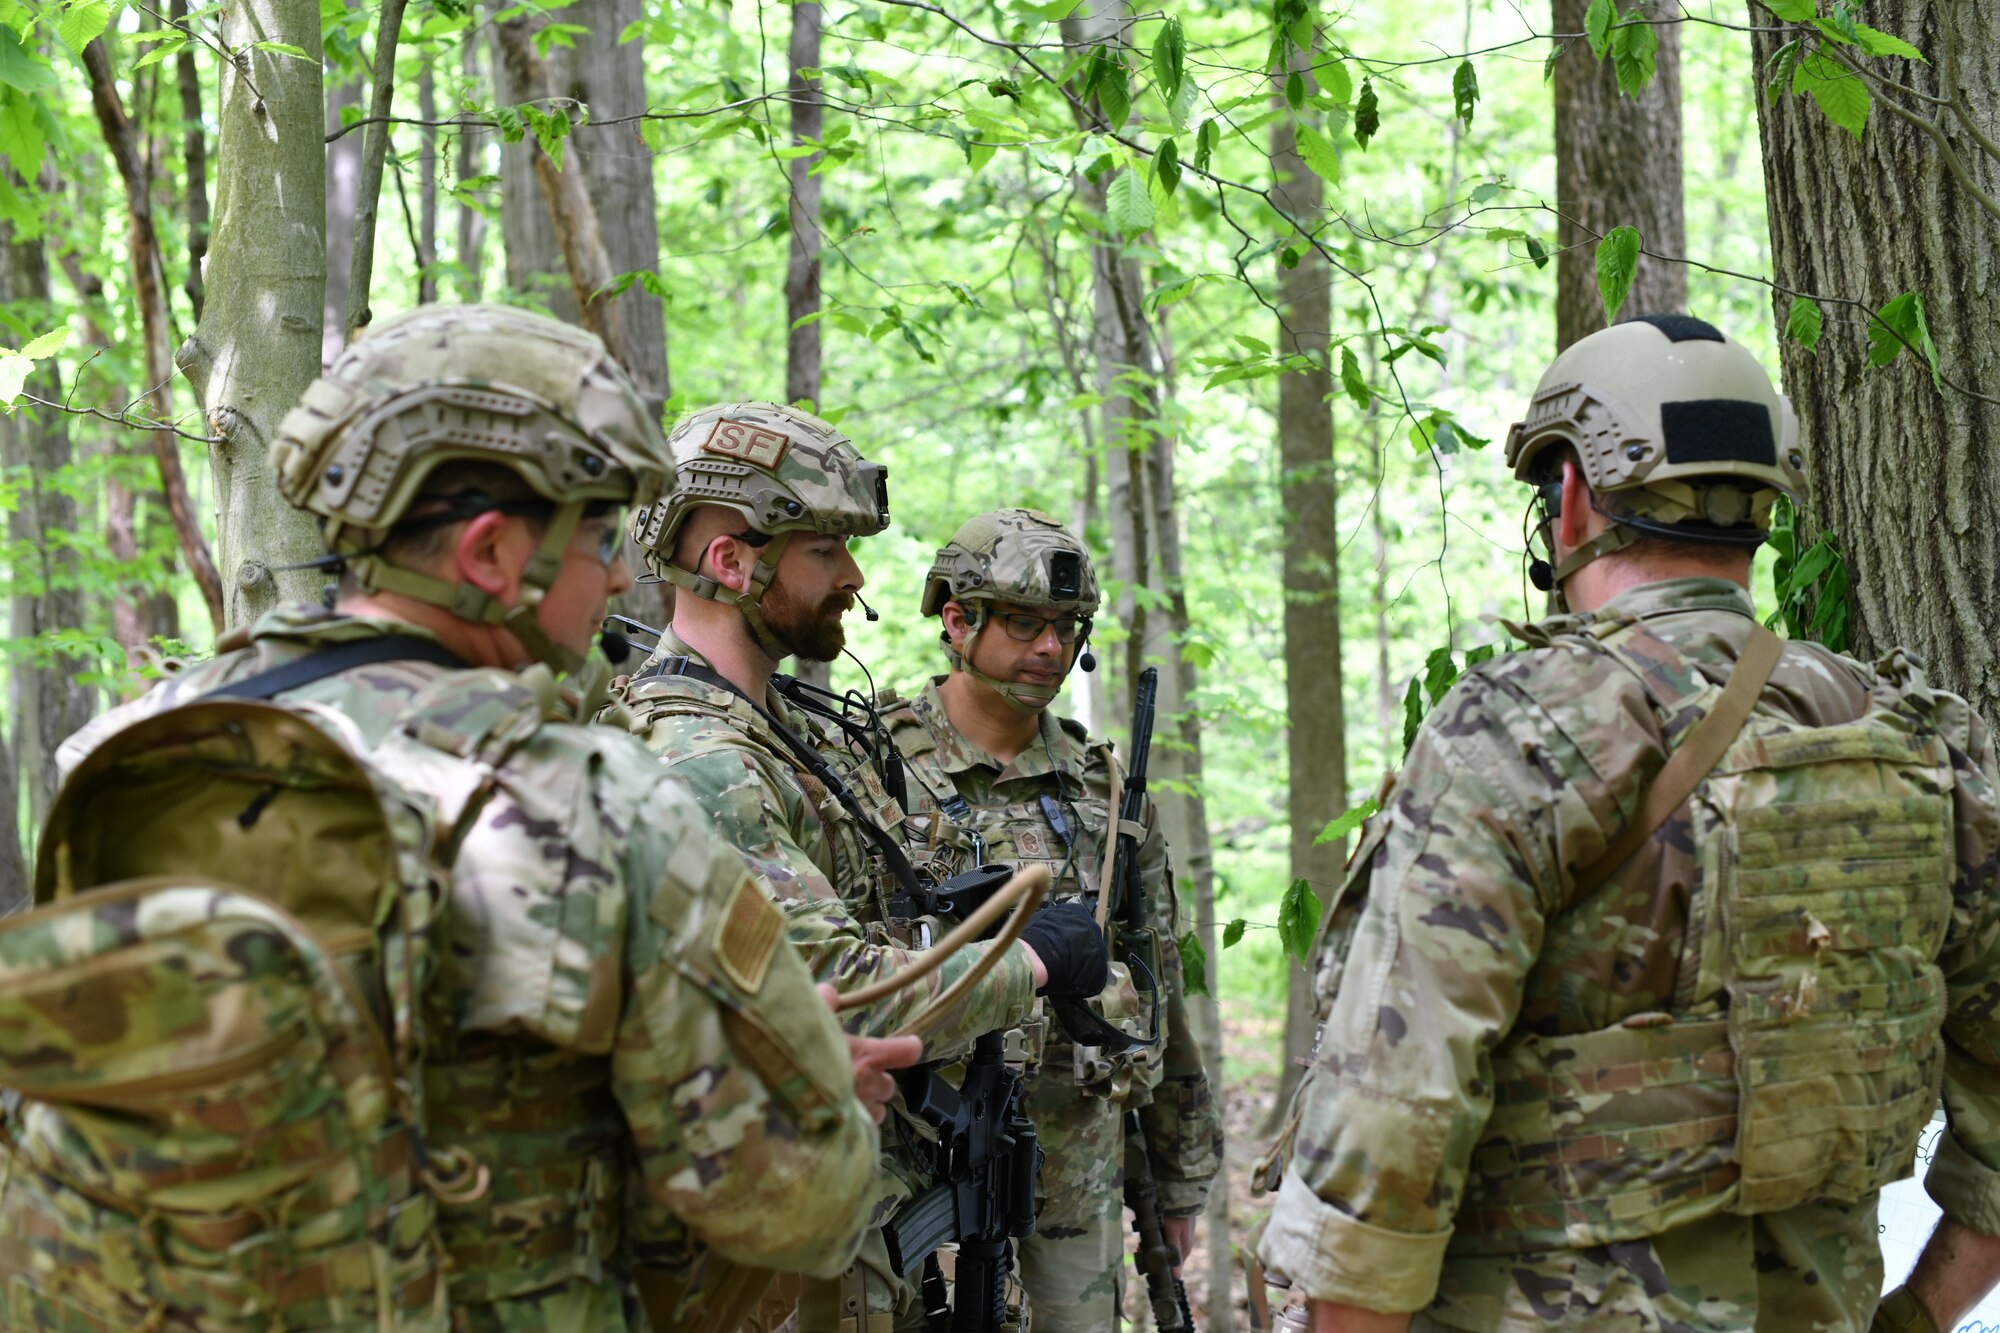 Members of the 439th Security Forces Squadron, Westover Air Reserve Base, Massachusetts, and the 914th Security Forces Squadron, Niagara Falls Air Reserve Station, New York, discuss tactics using a sector sketch during a static defense exercise, May 19, 2023, at Camp James A. Garfield Joint Military Training Center, Ohio.